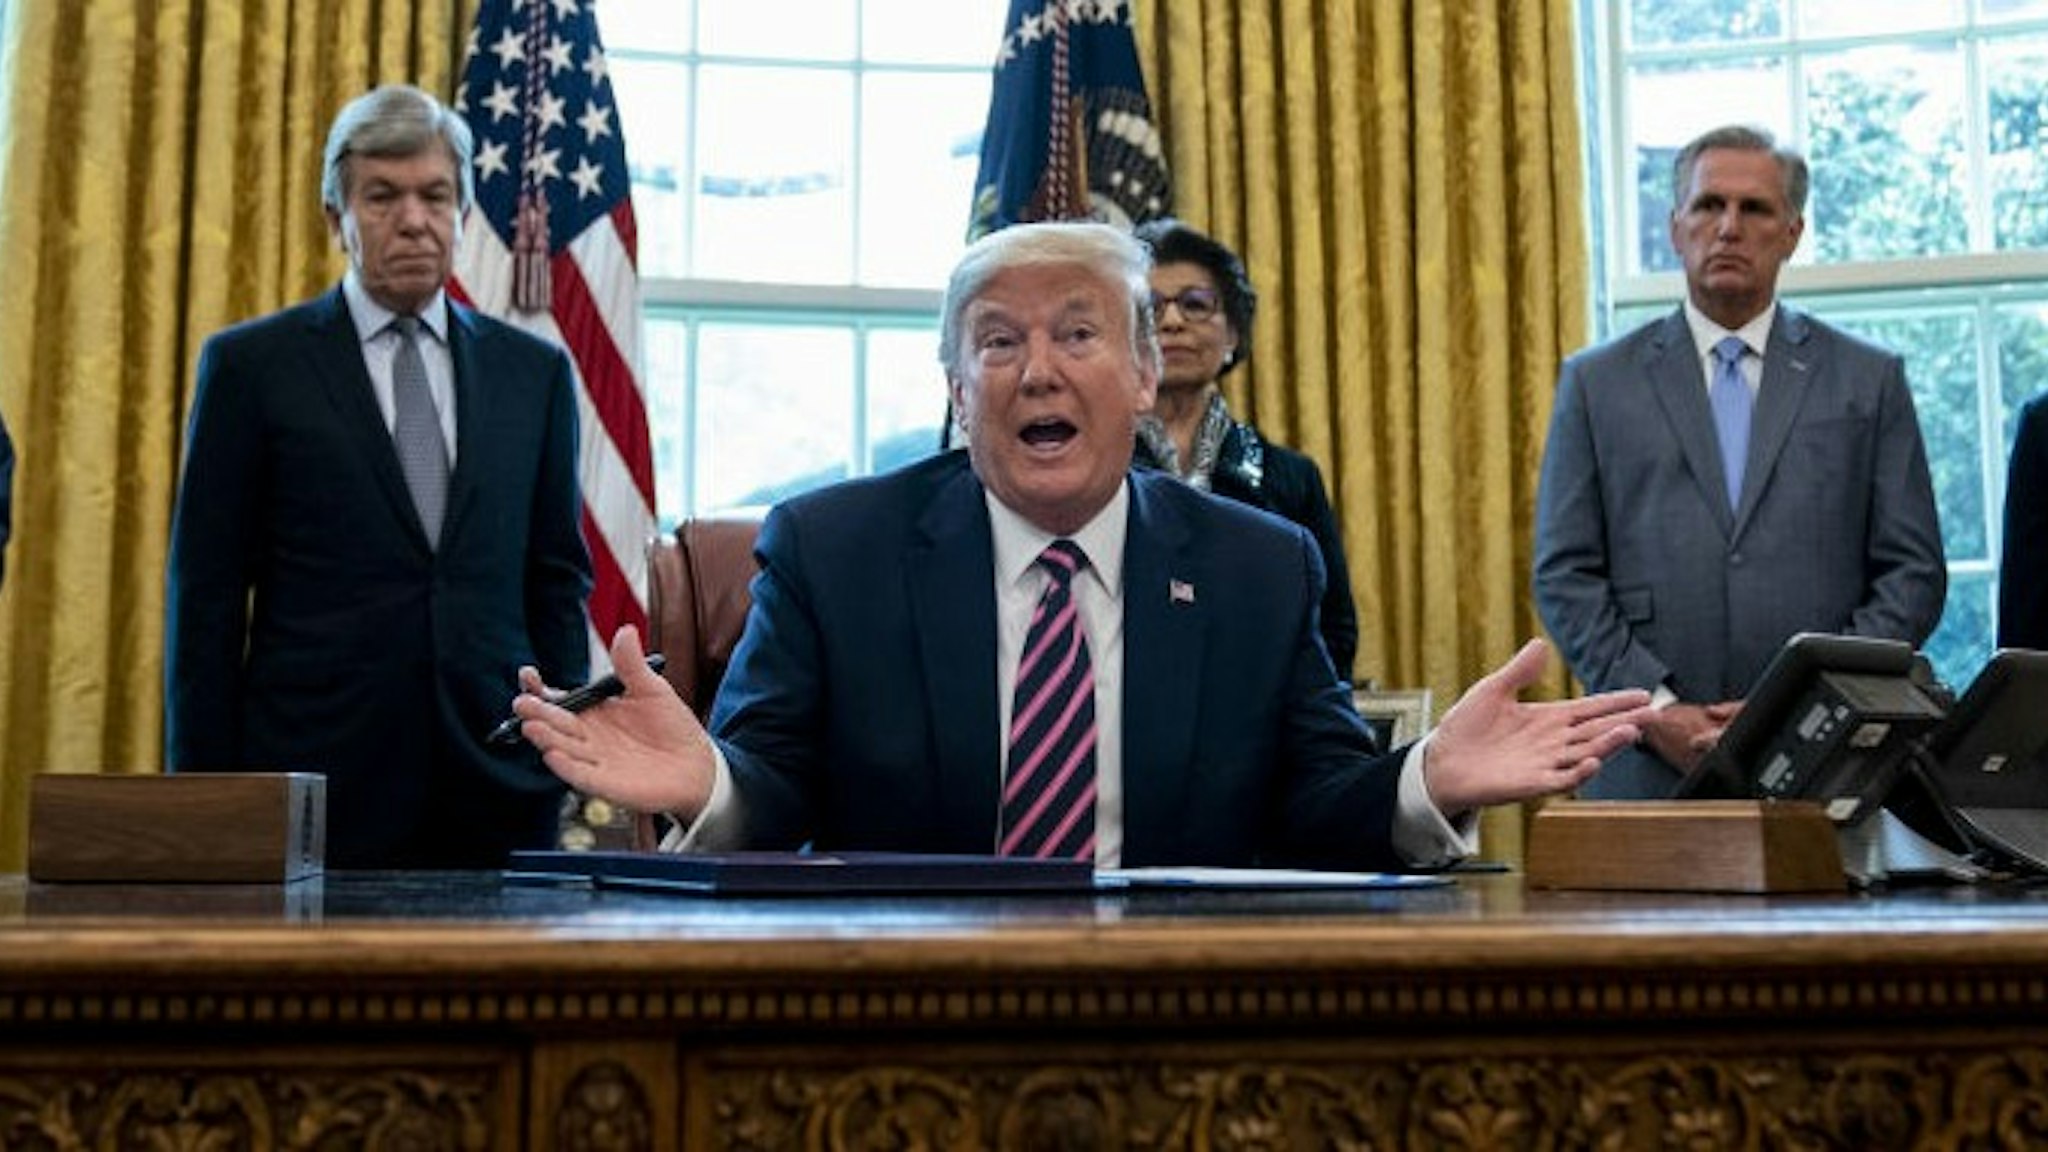 U.S. President Donald Trump speaks during a signing ceremony for H.R. 266, The Paycheck Protection Program and Health Care Enhancement Act, with members of his administration and Republican lawmakers in the Oval Office of the White House in Washington, D.C., U.S., on Friday, April 24, 2020. Trump signed the $484 billion spending package that includes more money for small businesses, the latest bid by Washington lawmakers to rescue an economy devastated by the coronavirus pandemic. Photographer: